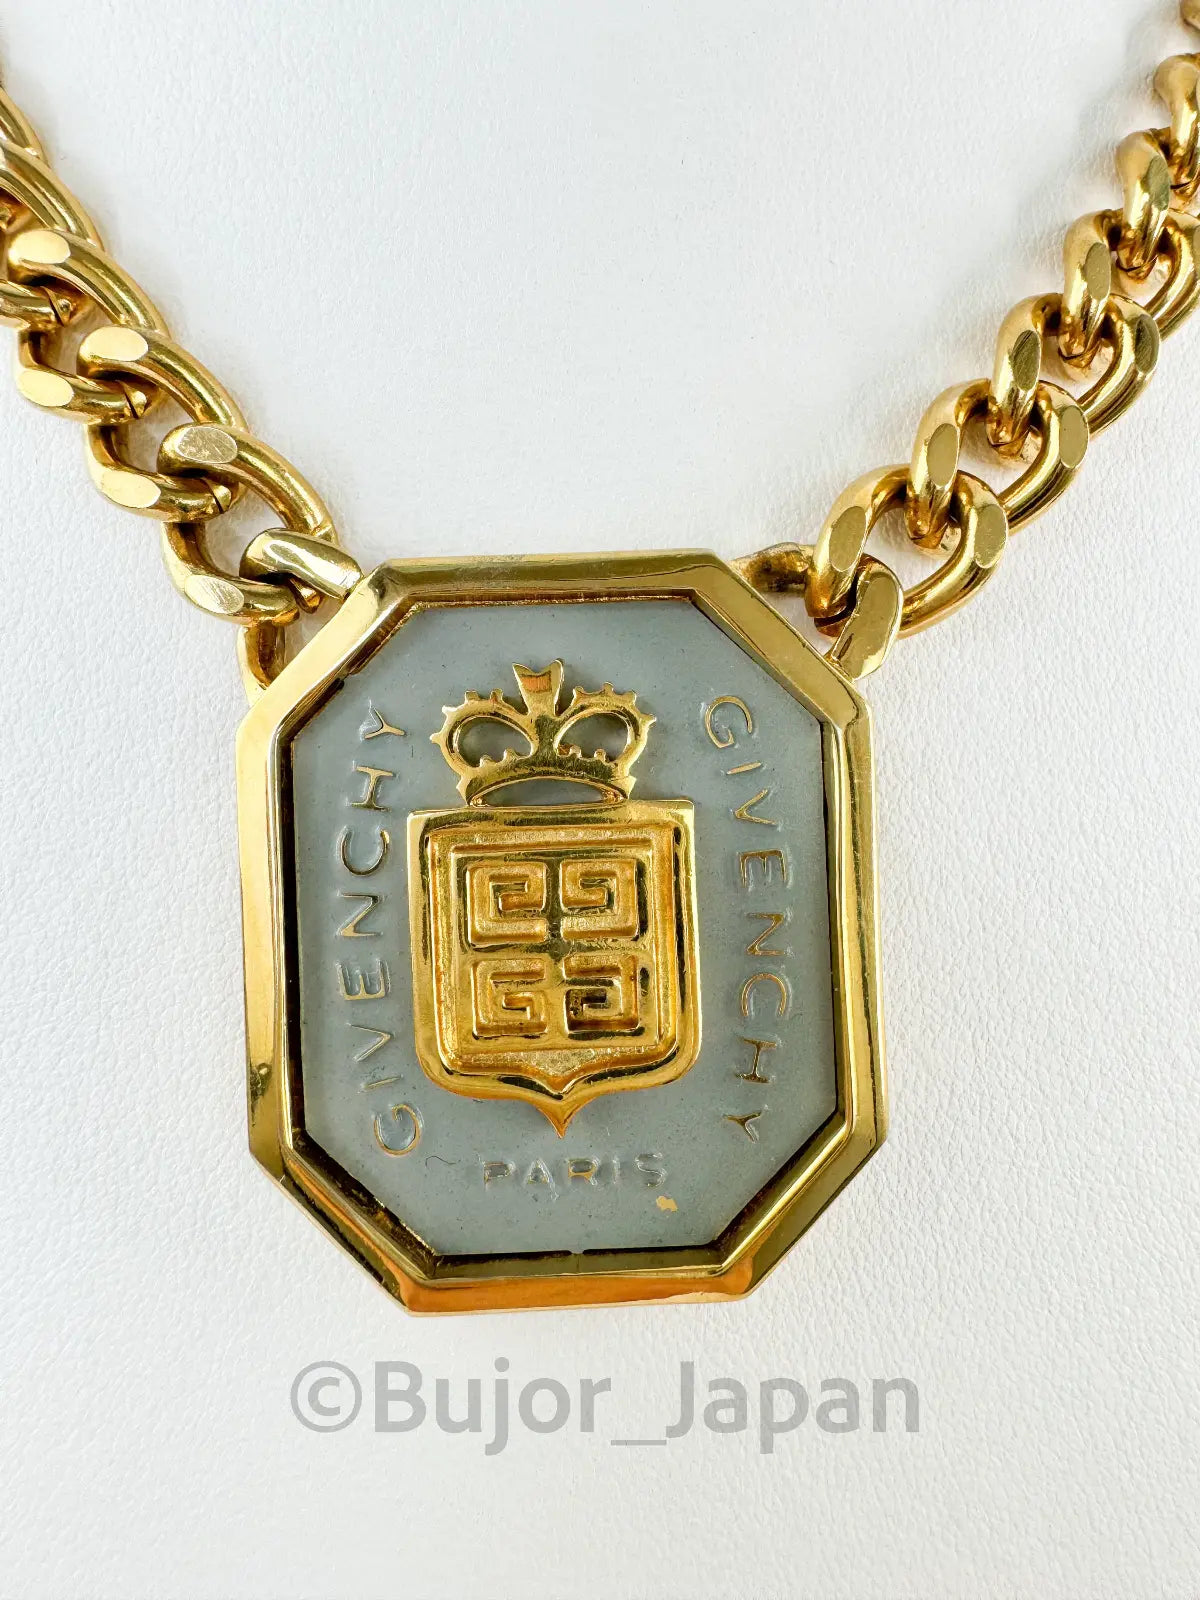 Vintage Givenchy Necklace, Givenchy Logo Charm Necklace, Gold Tone Necklace, Choker Necklace, Chain Necklace, Vintage Necklace Unisex